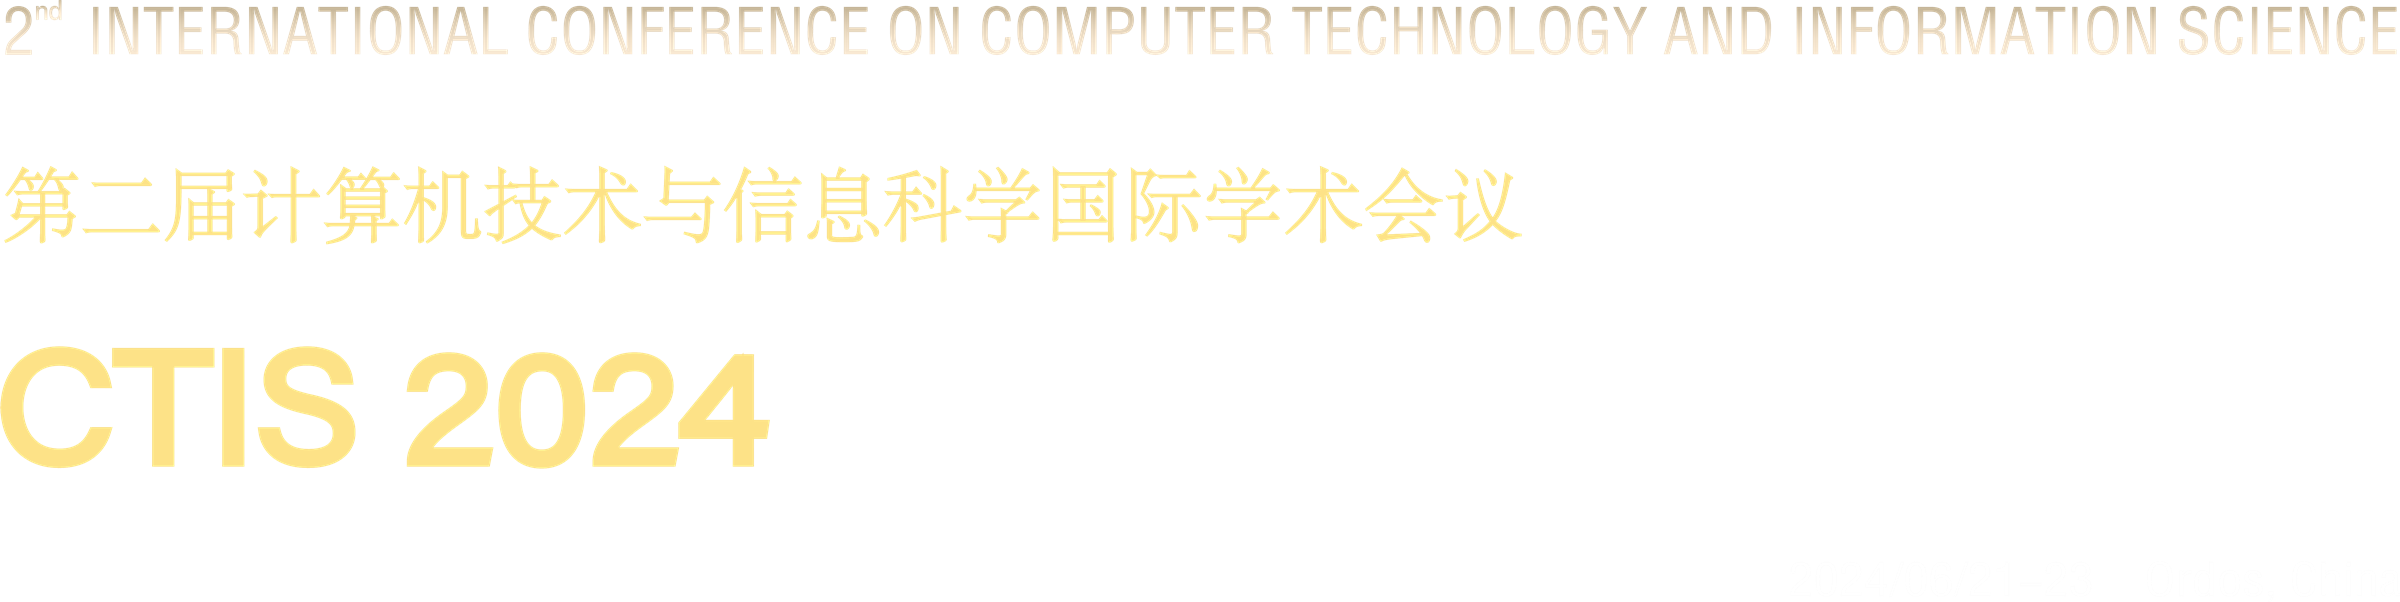 The 2nd International Conference on Computer Technology and Information Science (CTIS 2024) - 2024/06/21-23 Ordos China